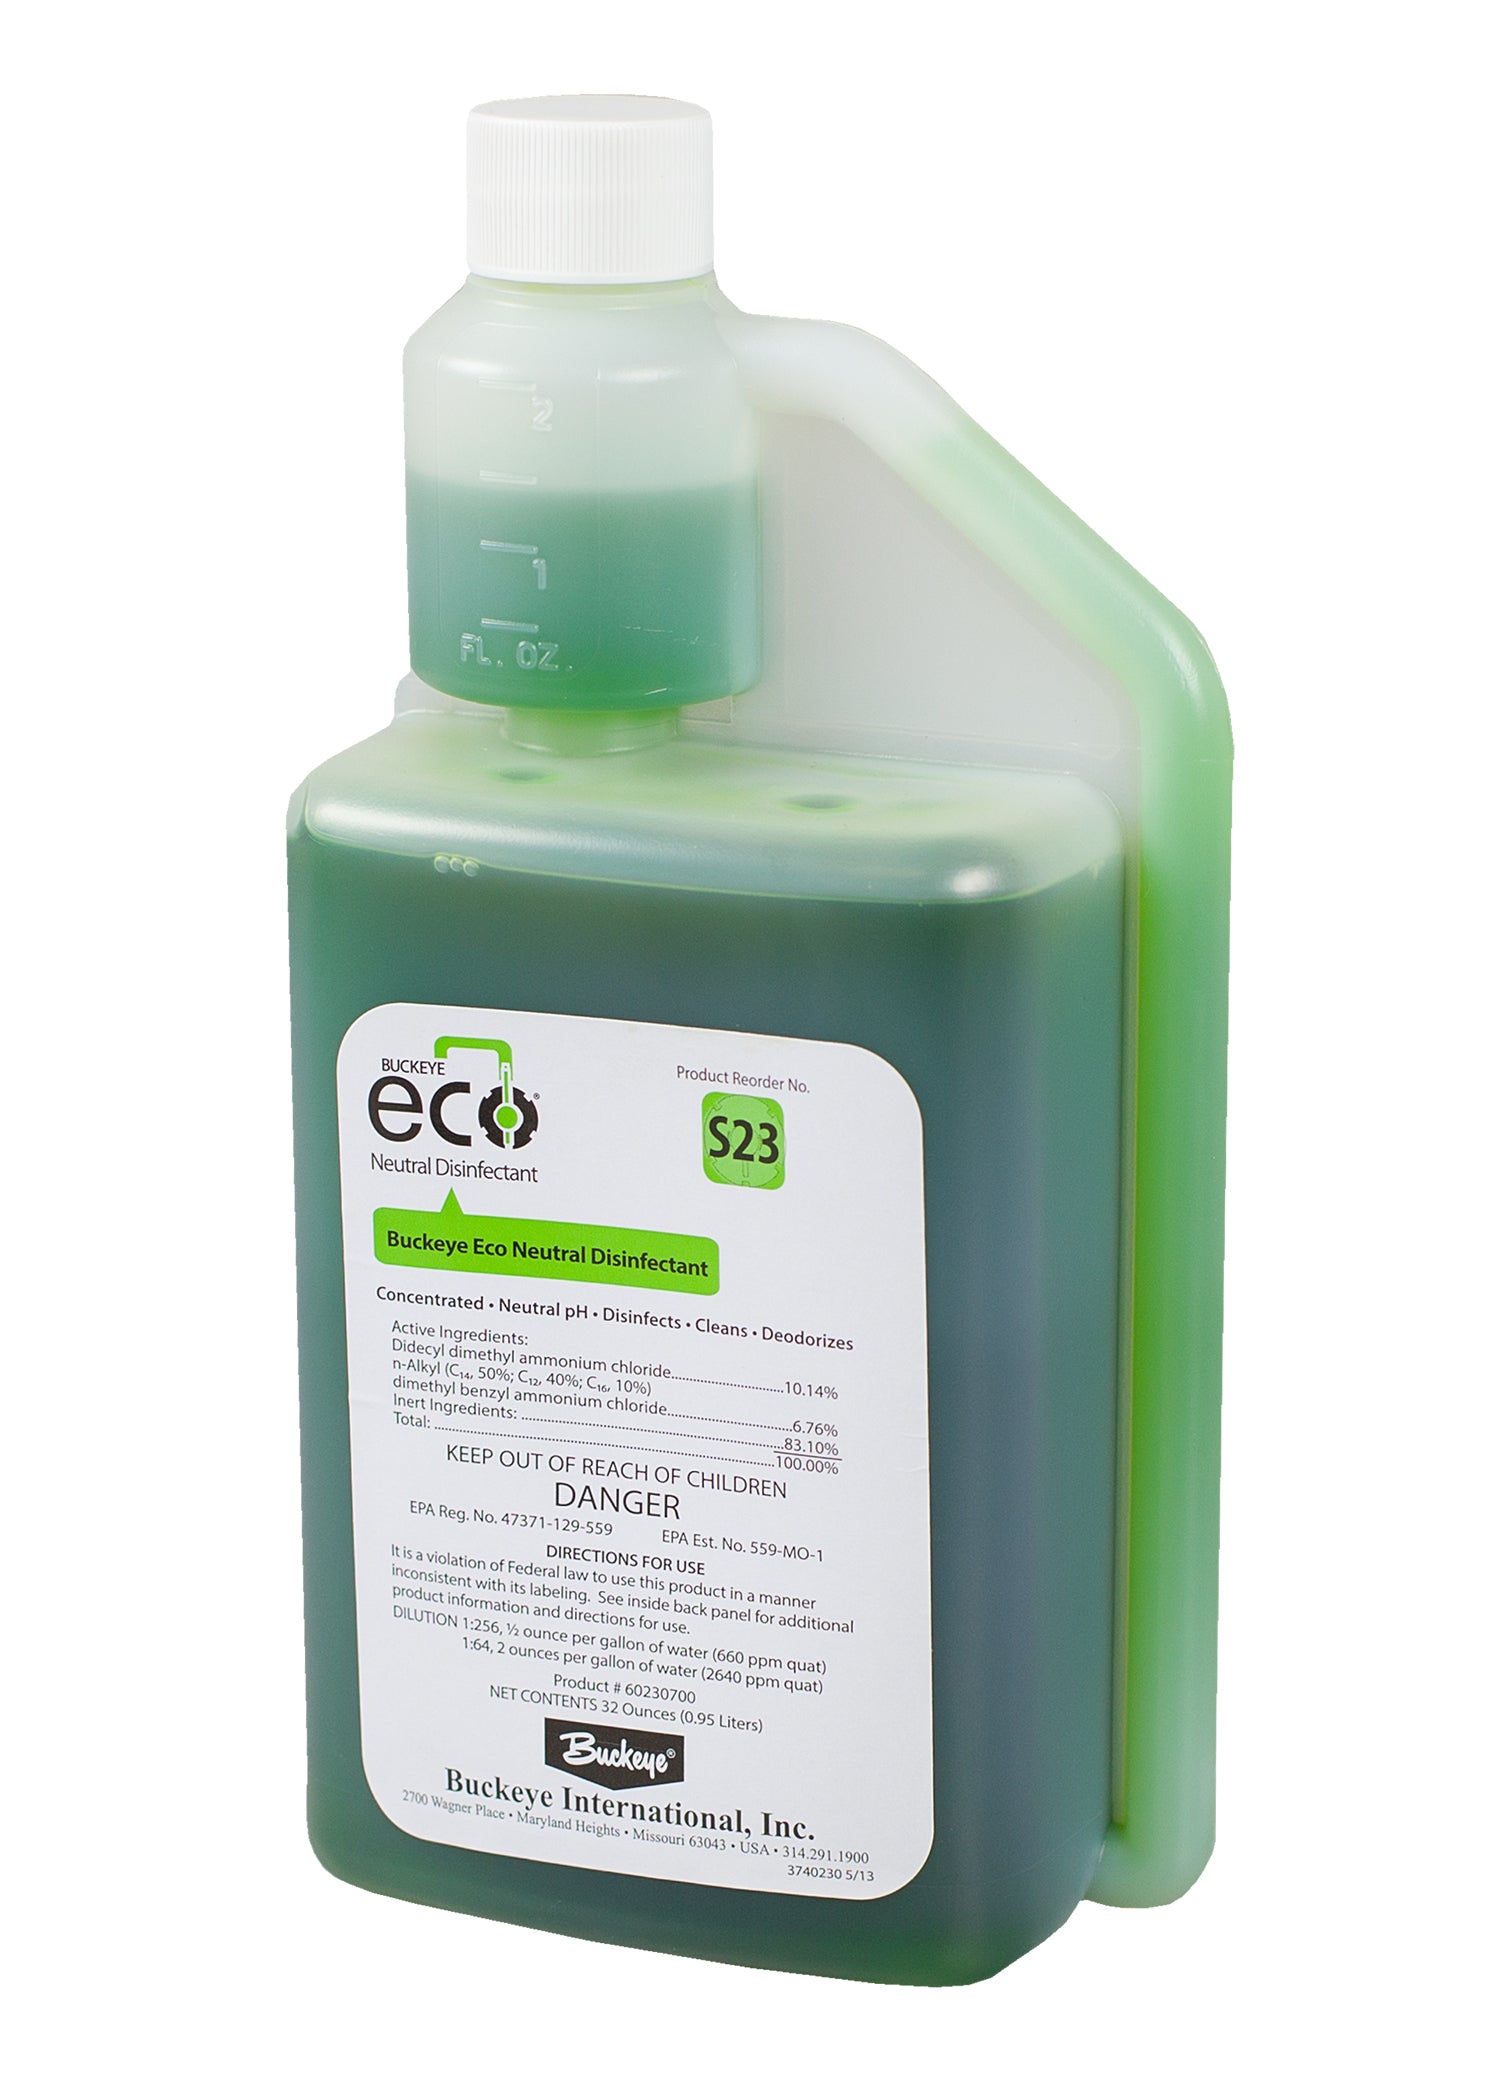 eco s23 | Iris your day to day partner